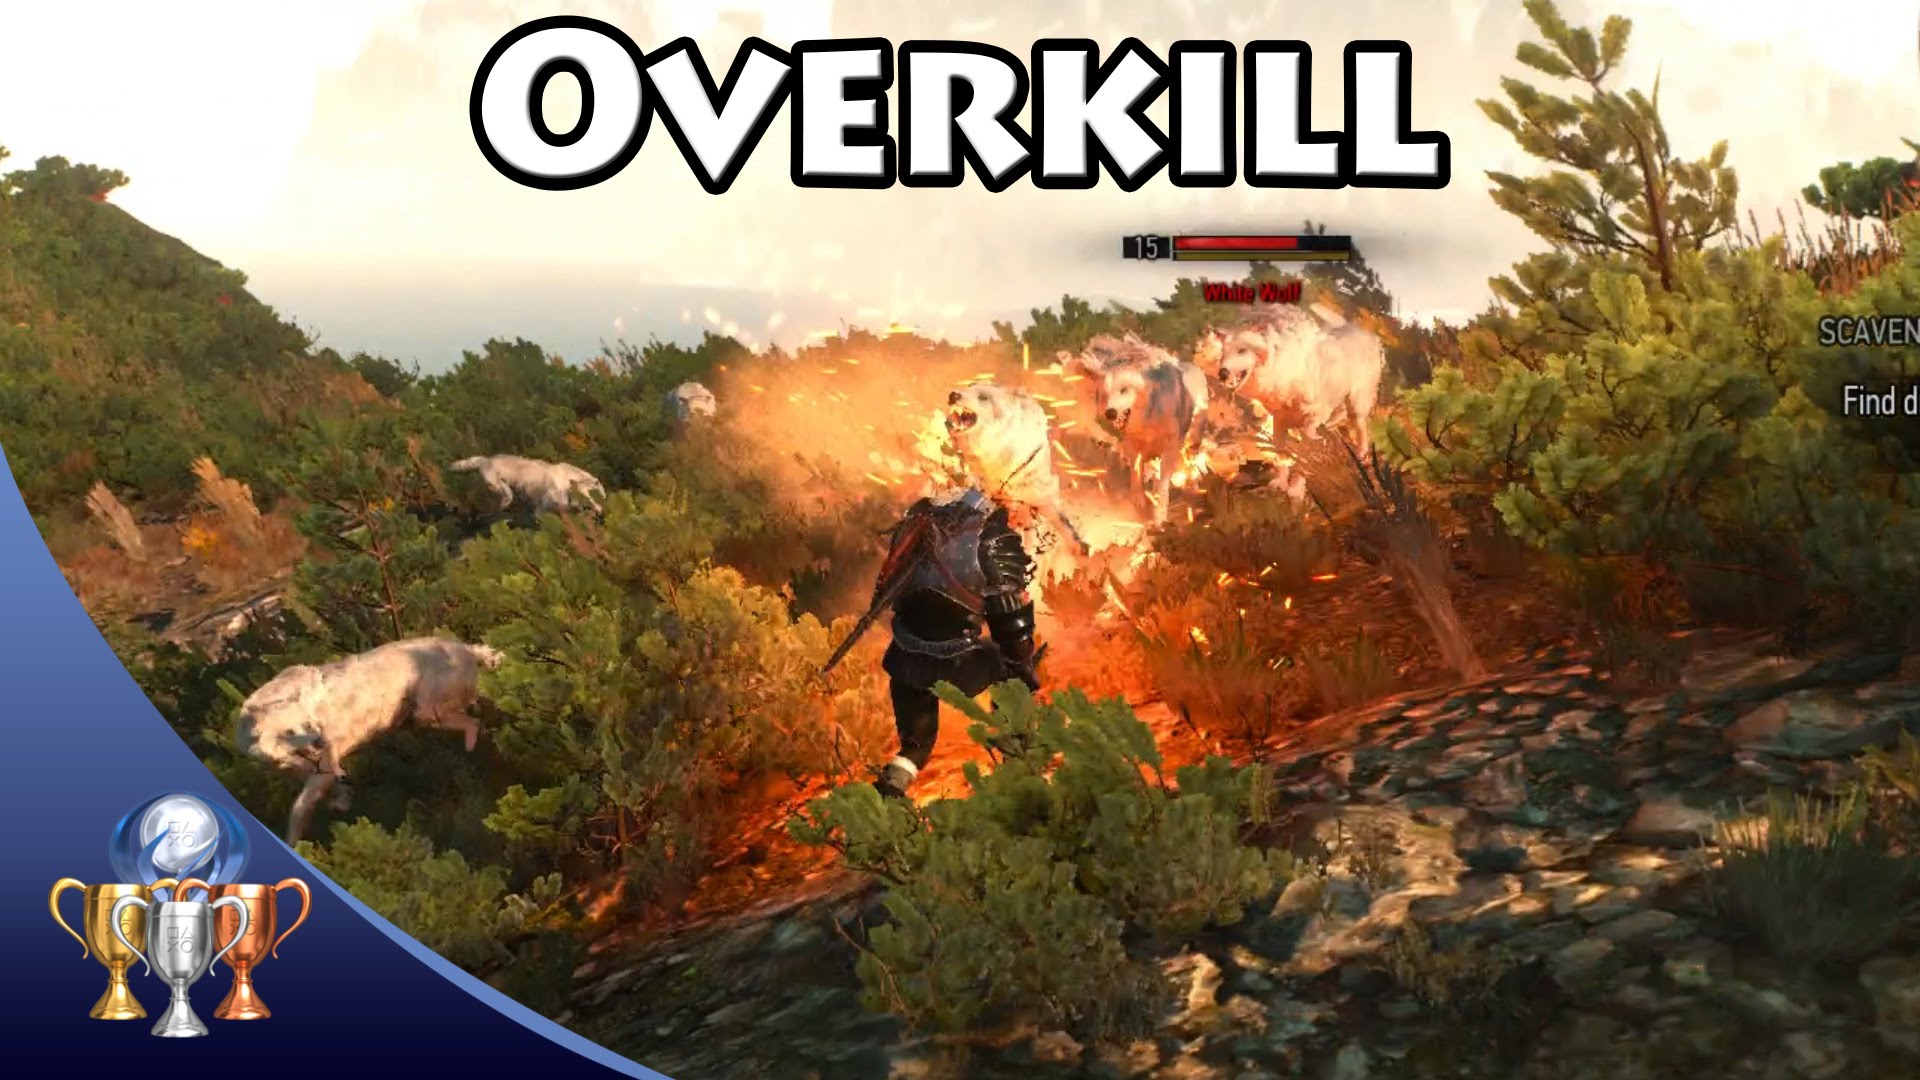 witcher 3 overkill trophy guide